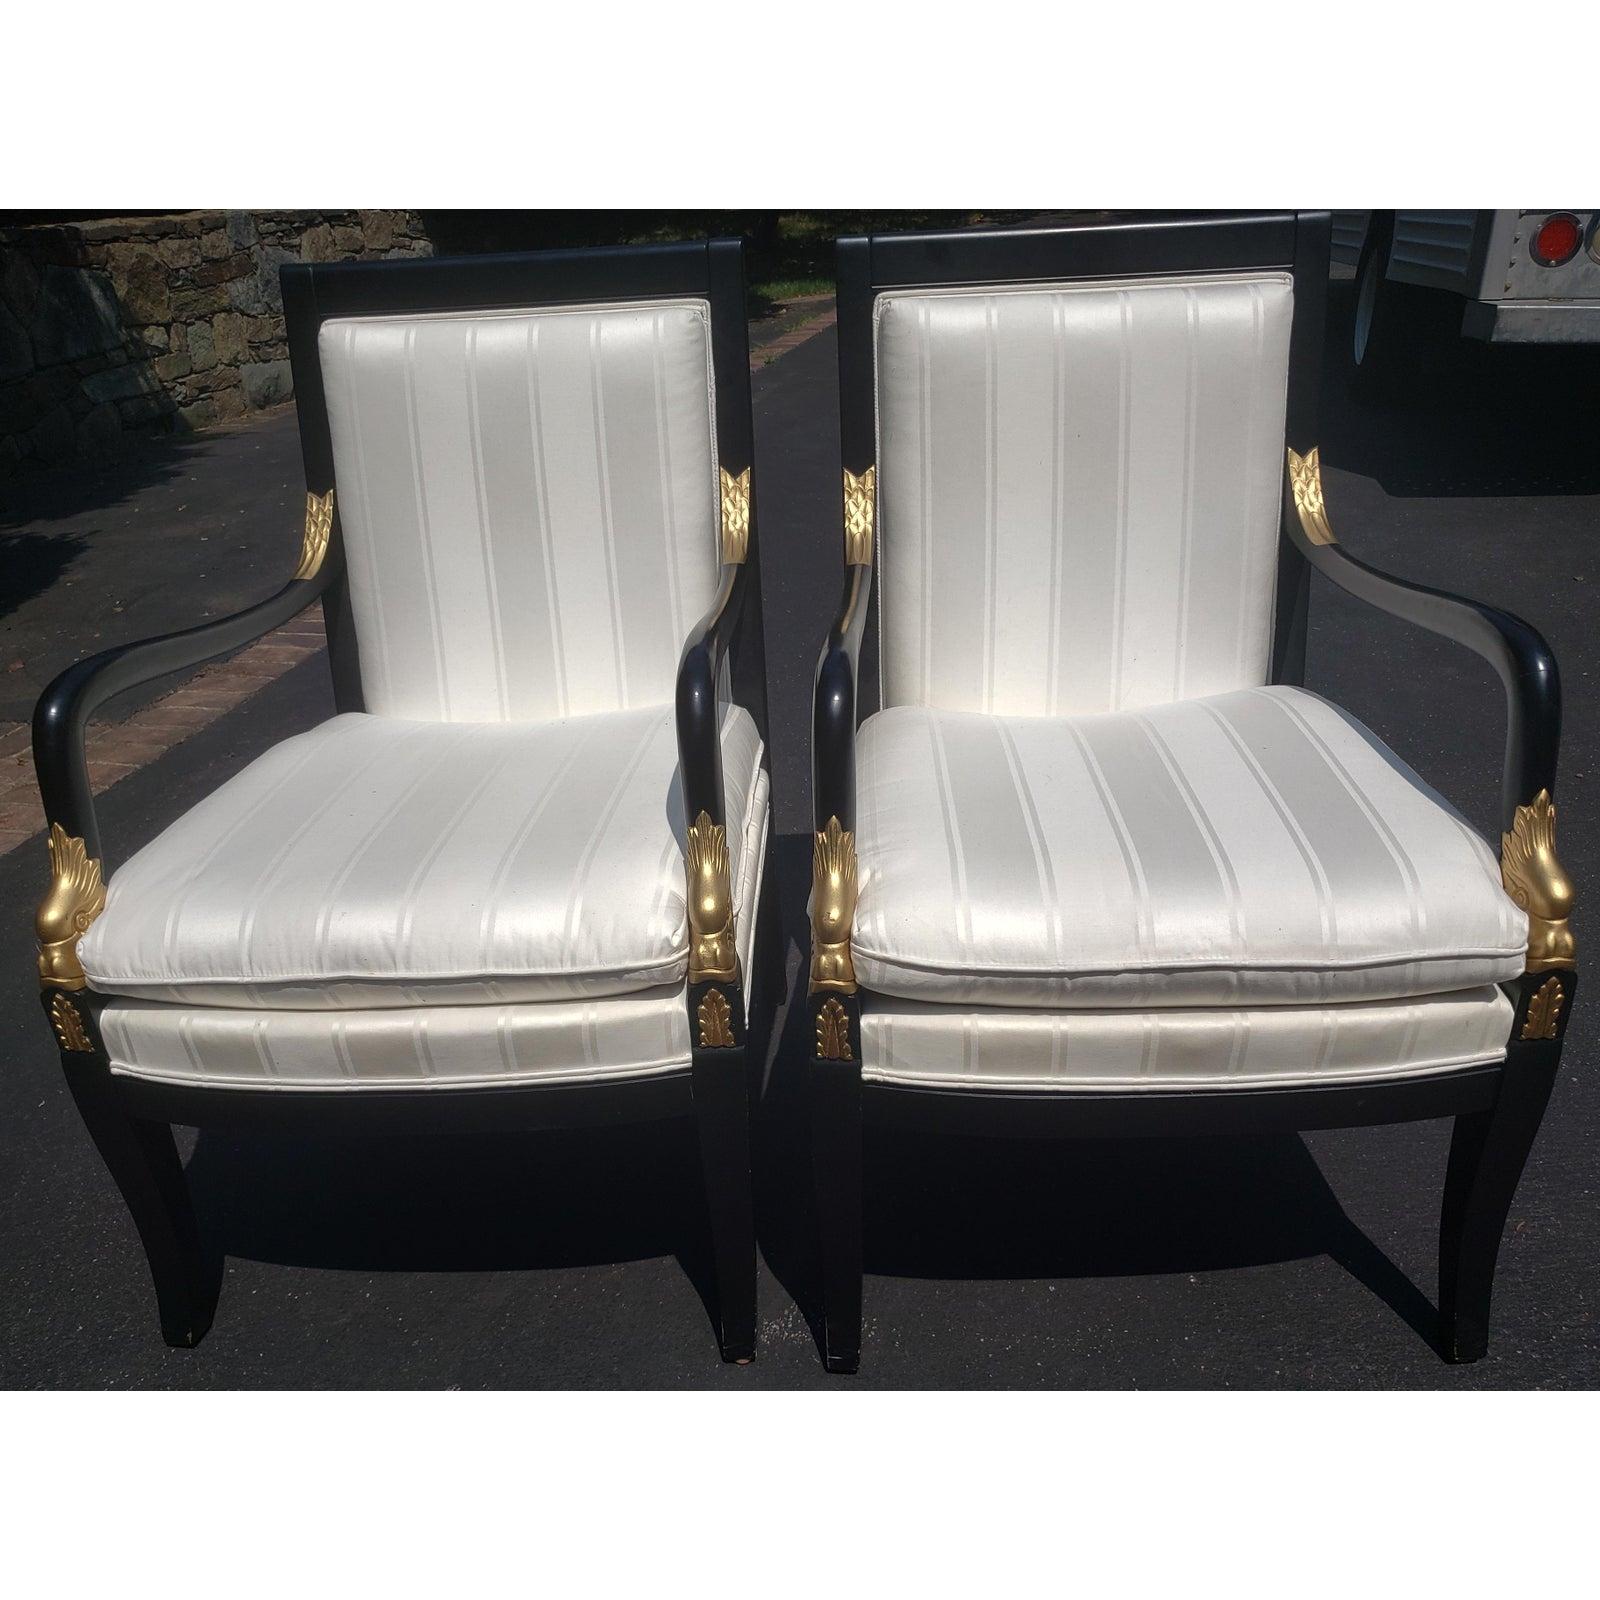 Ethan Allen gilded upholstered lounge arm chairs with accent pillows. Excellent condition. Chair measures 23